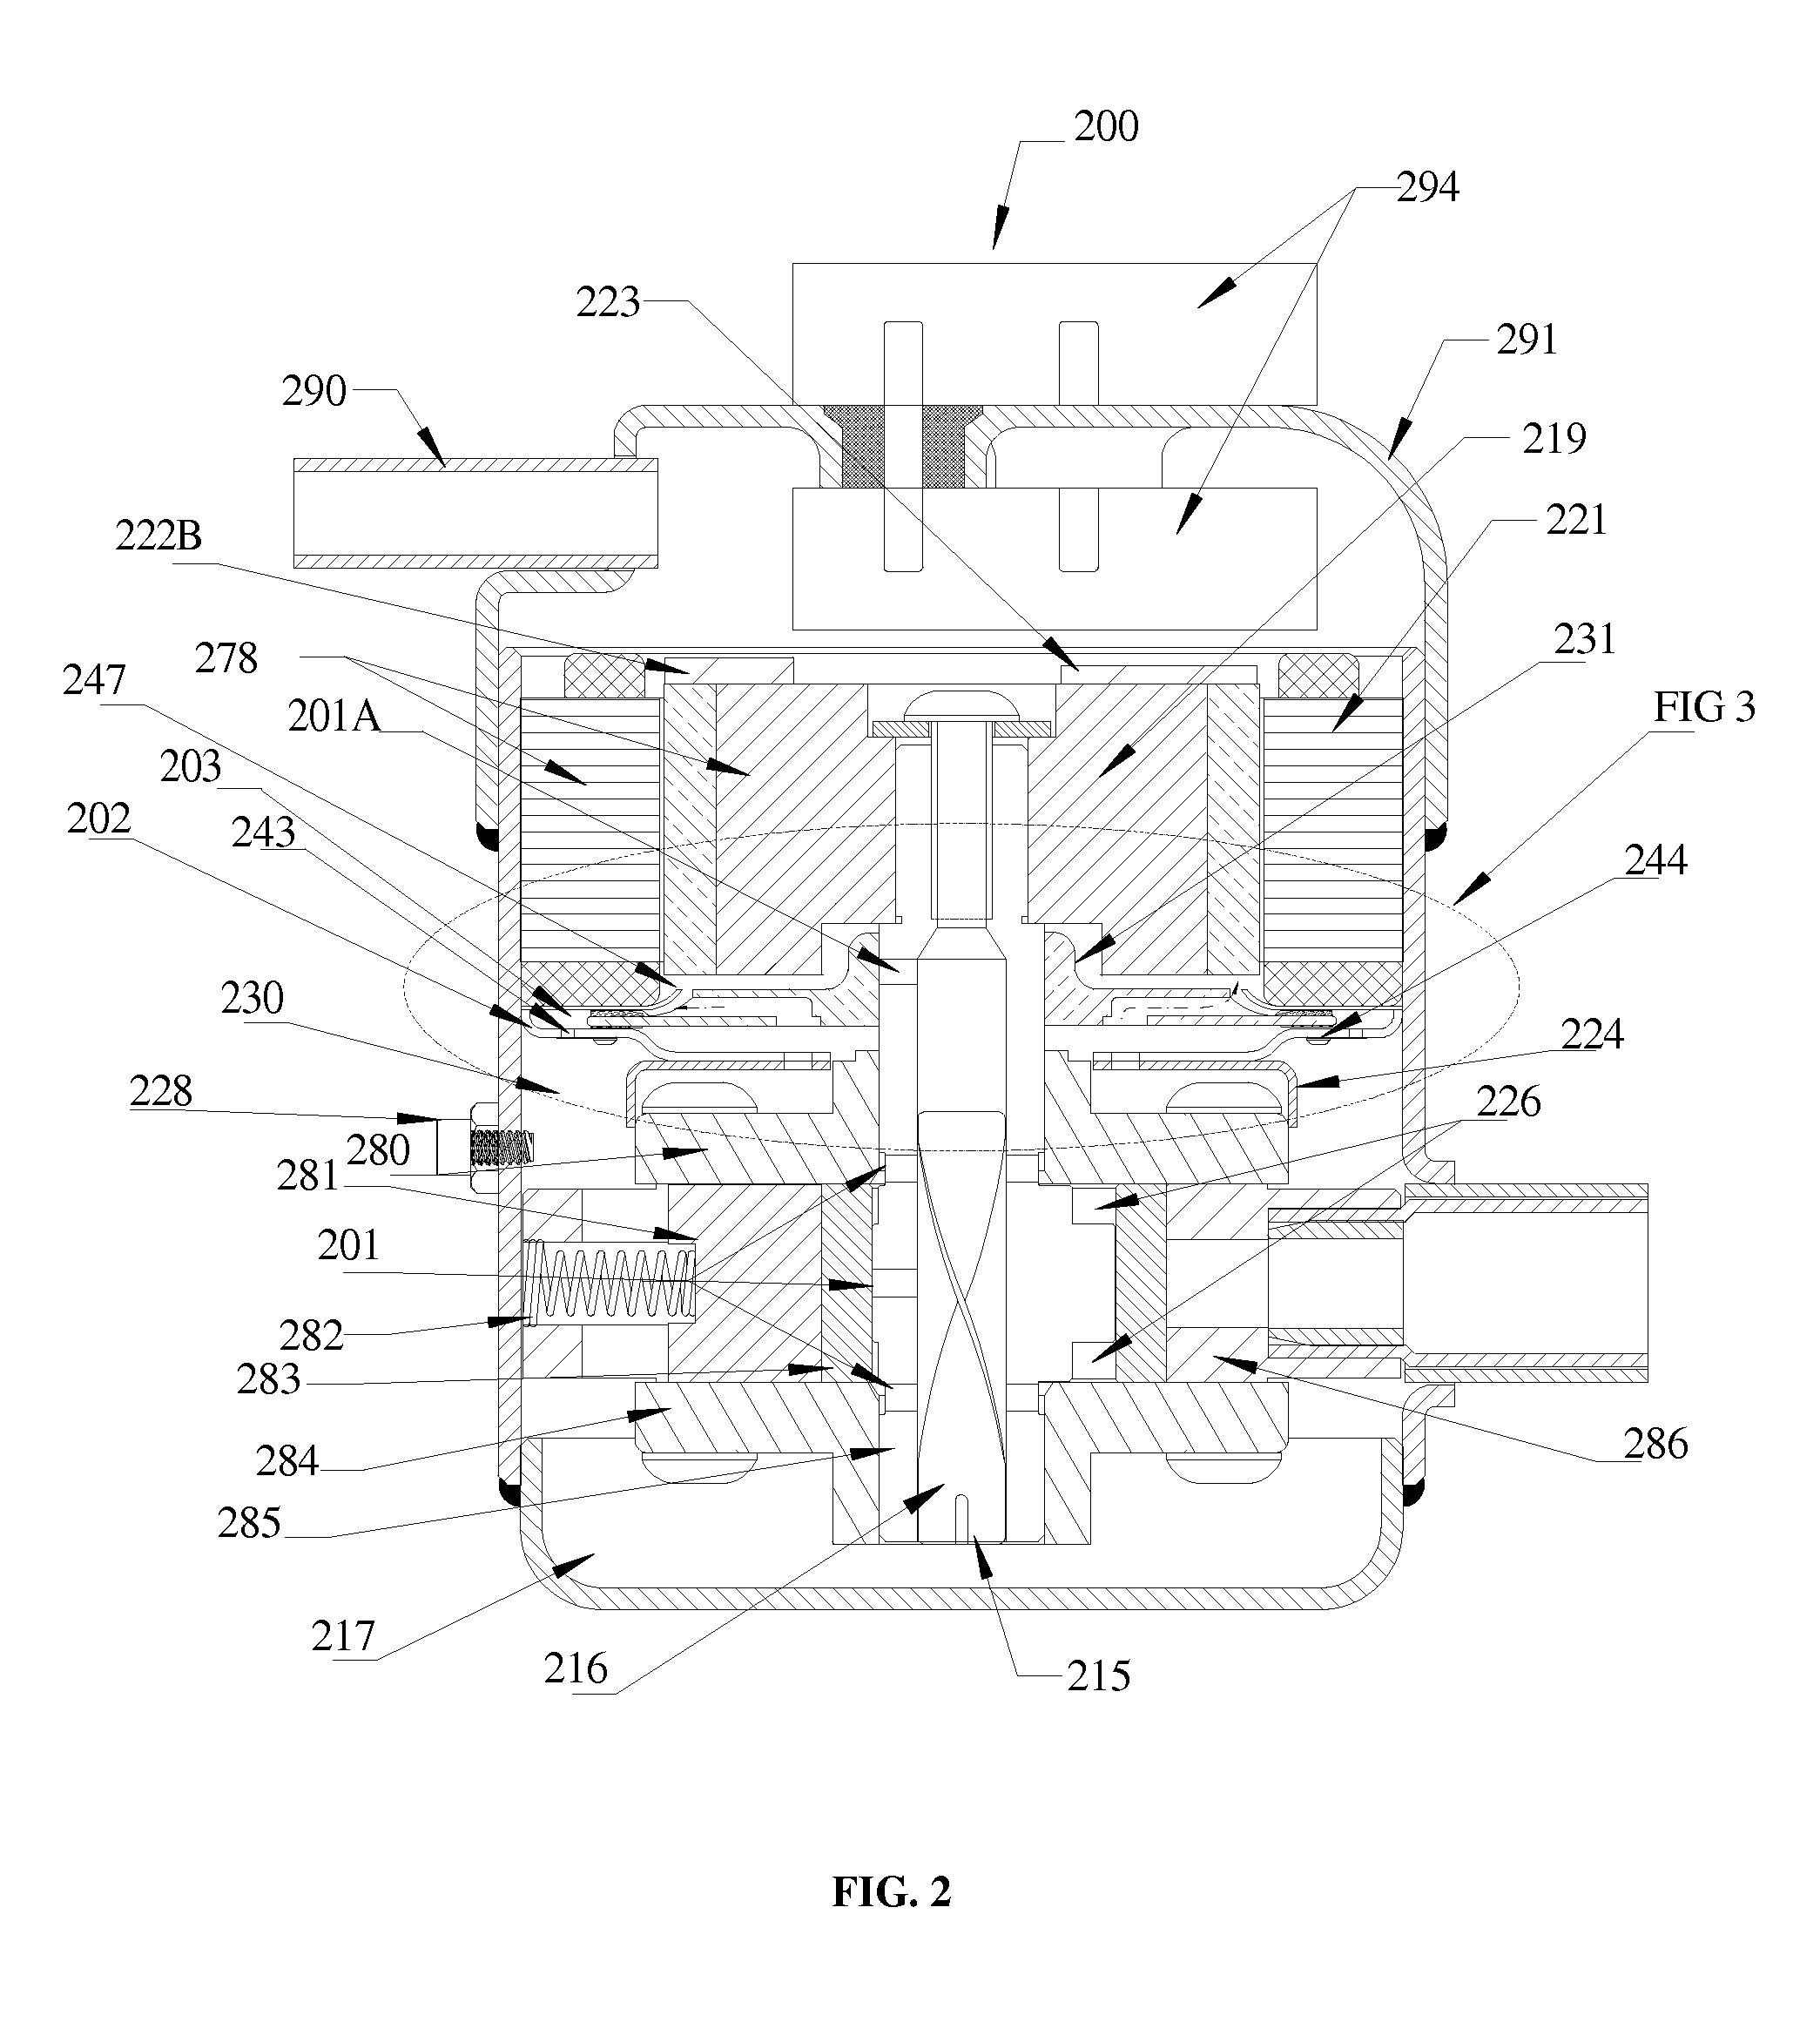 Orientation and gravity insensitive in-casing oil management system for fluid displacement devices, and methods related thereto